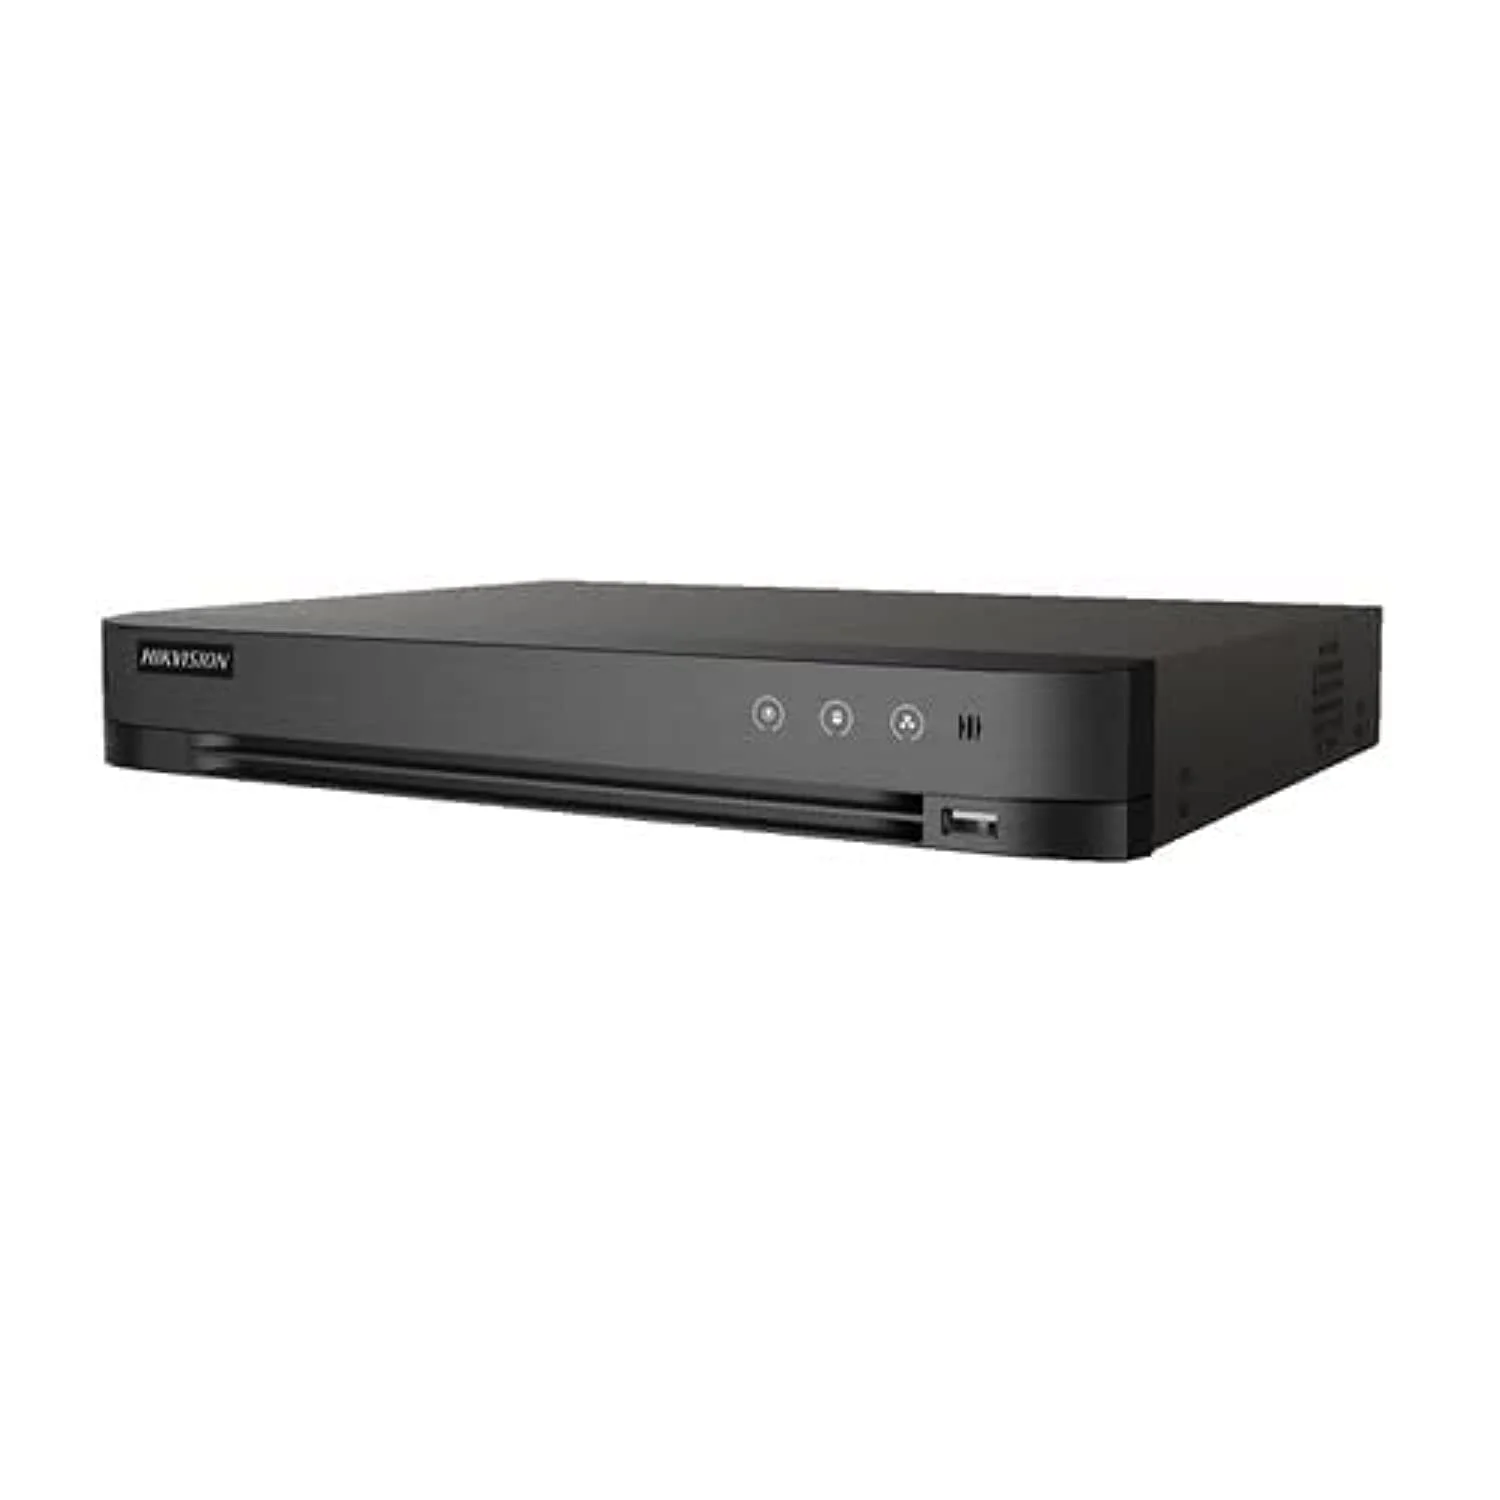 HIKVISION 8 Channel DVR IDS-7208HQHI-M1FA buy at best price